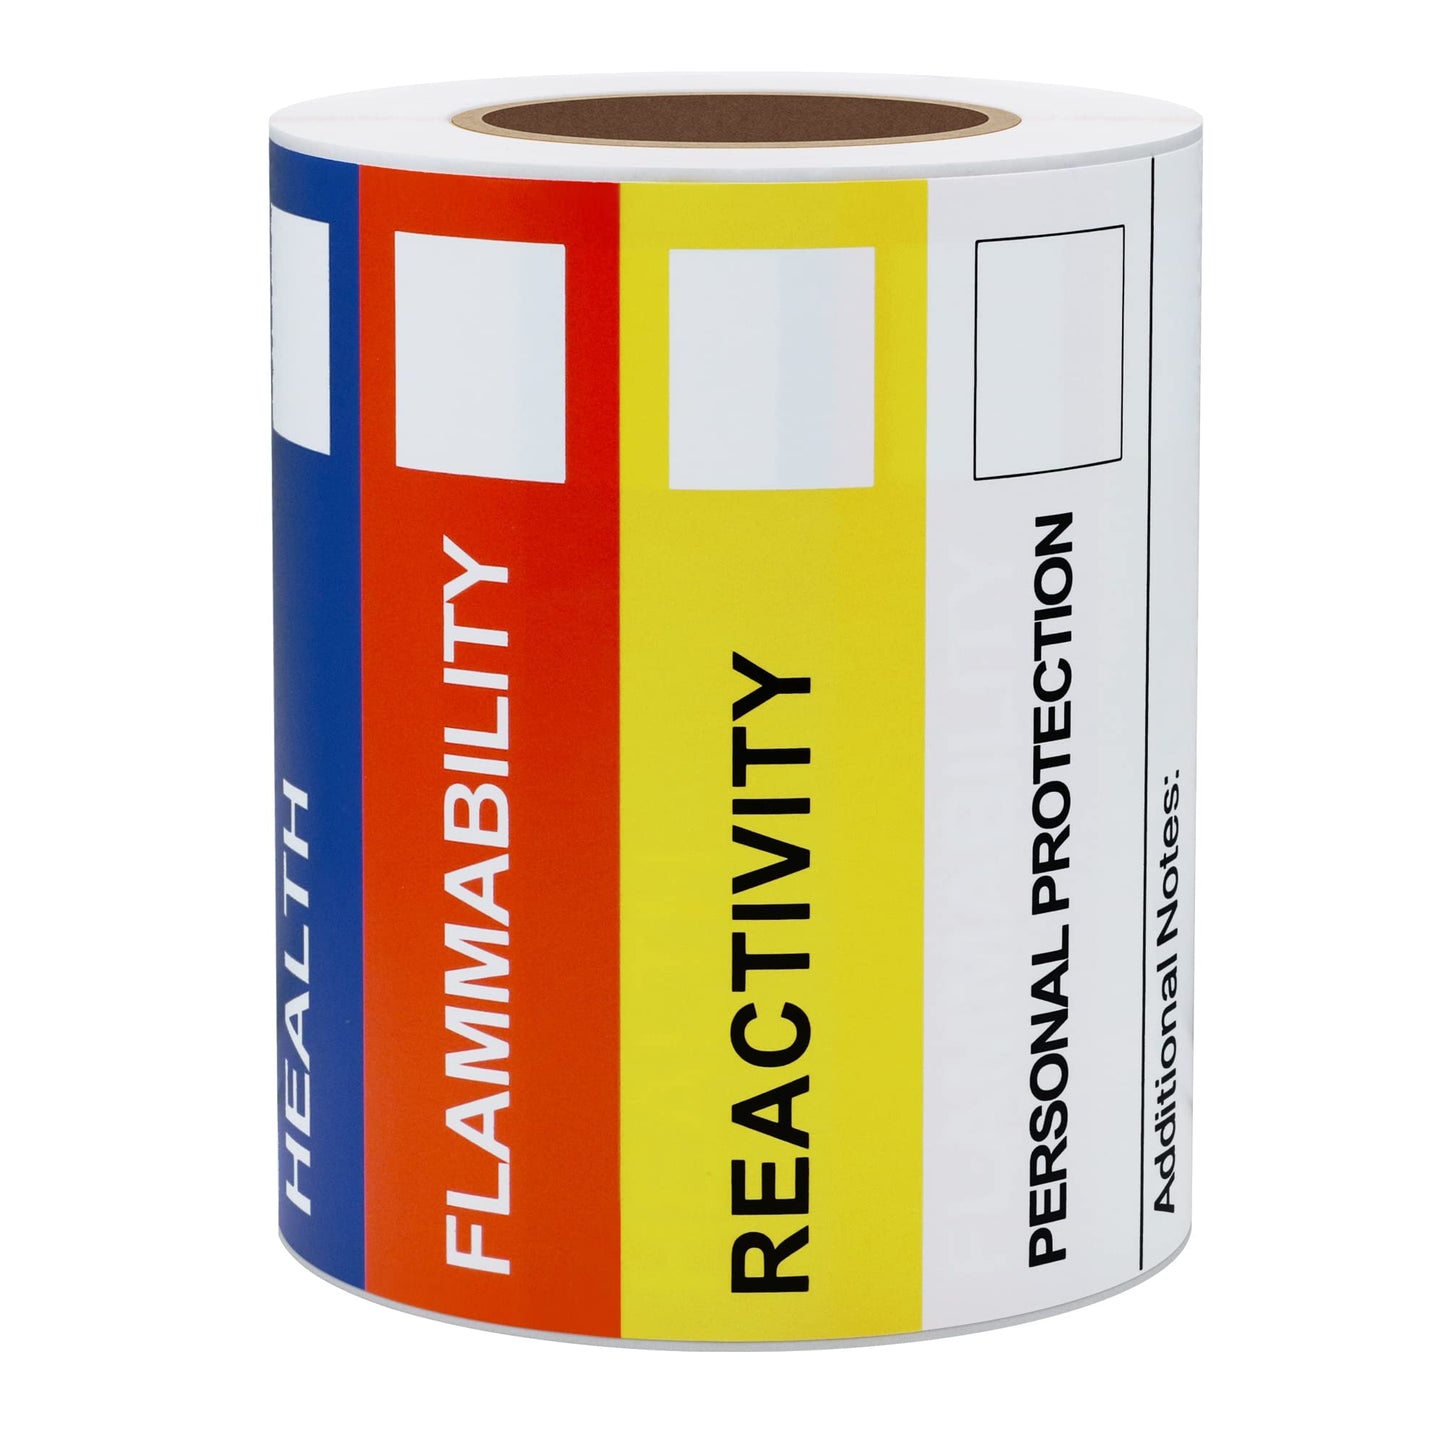 Hybsk "Health Flammability Reactivity" Labels/Stickers, 4" x 6", Multiple Colors, 100 Labels Per Roll